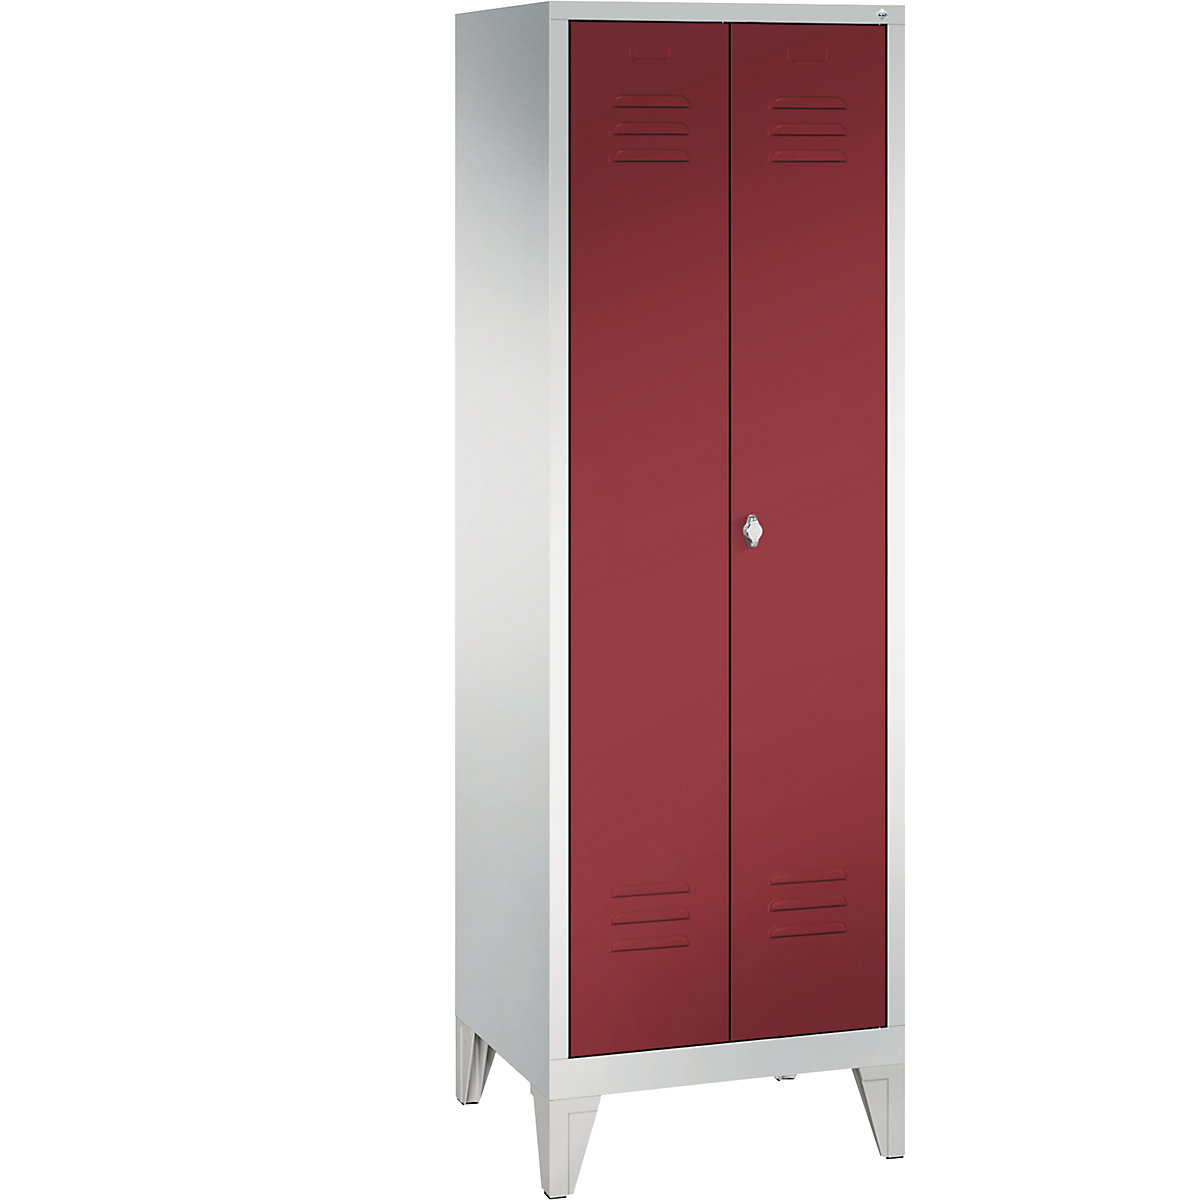 CLASSIC equipment cupboard with feet – C+P, 2 compartments, compartment width 300 mm, light grey / ruby red-4